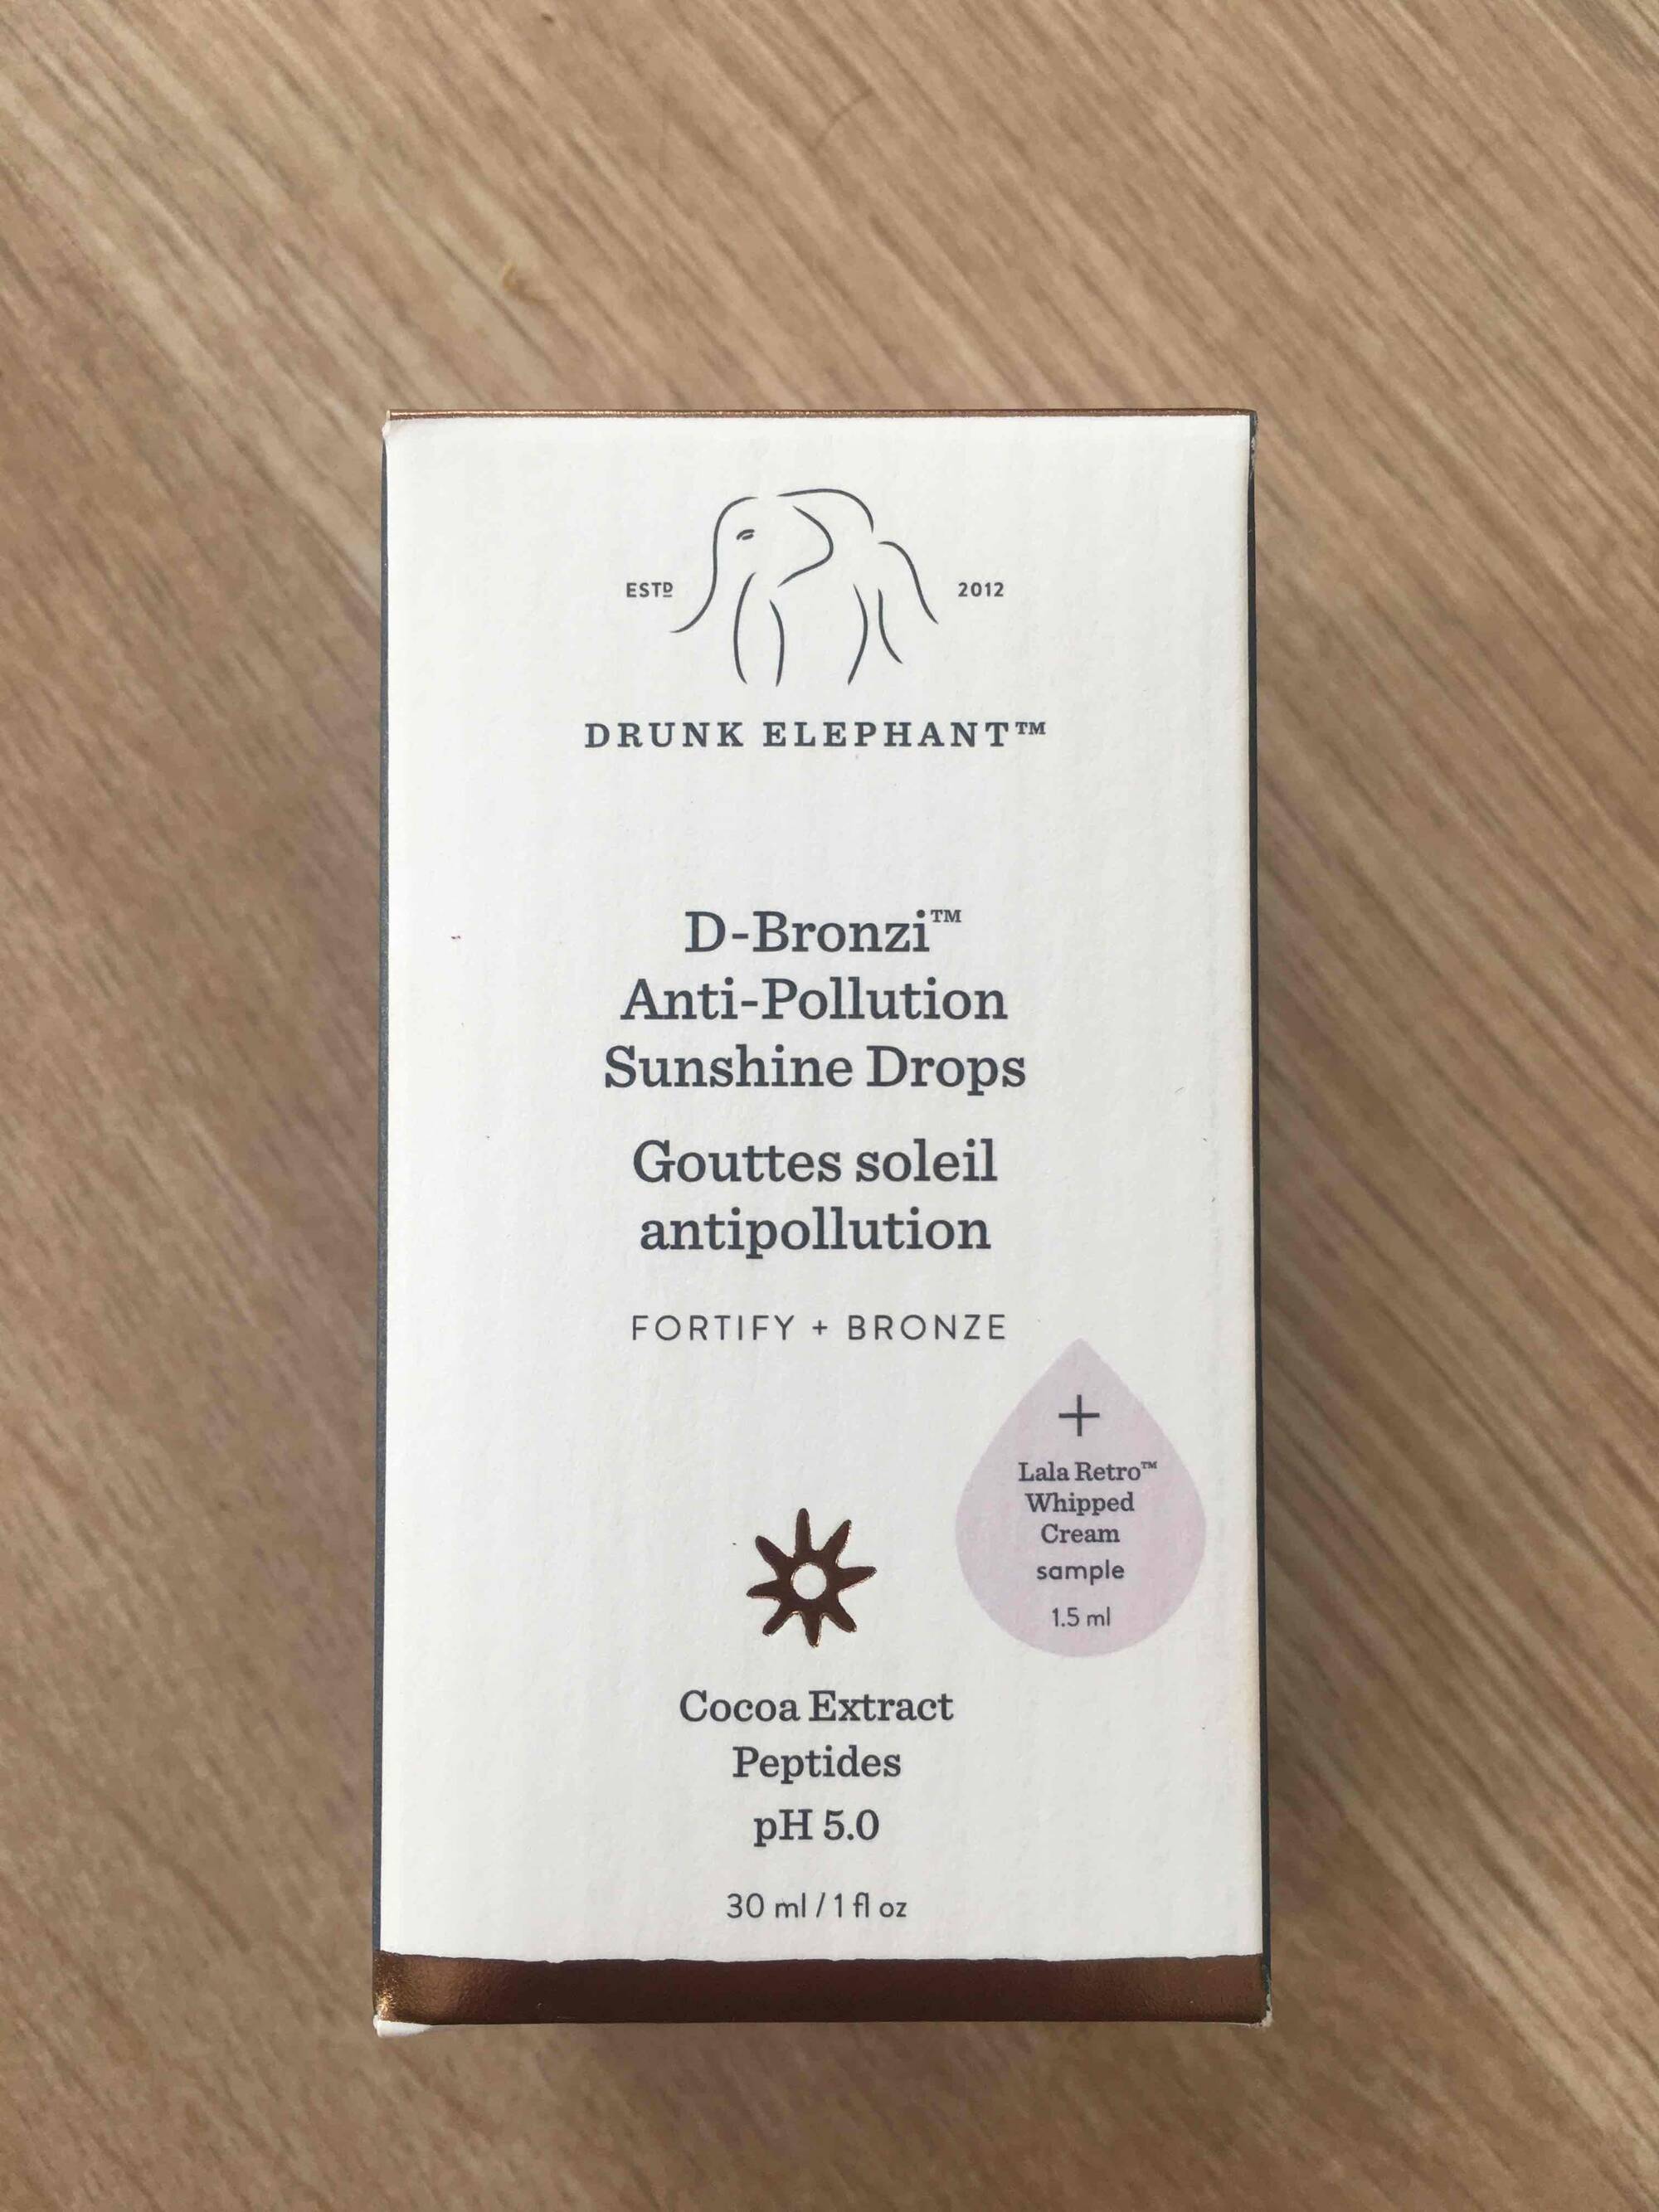 6 Of The Best Drunk Elephant Dupes From D-Bronzi Drops To Cleanser